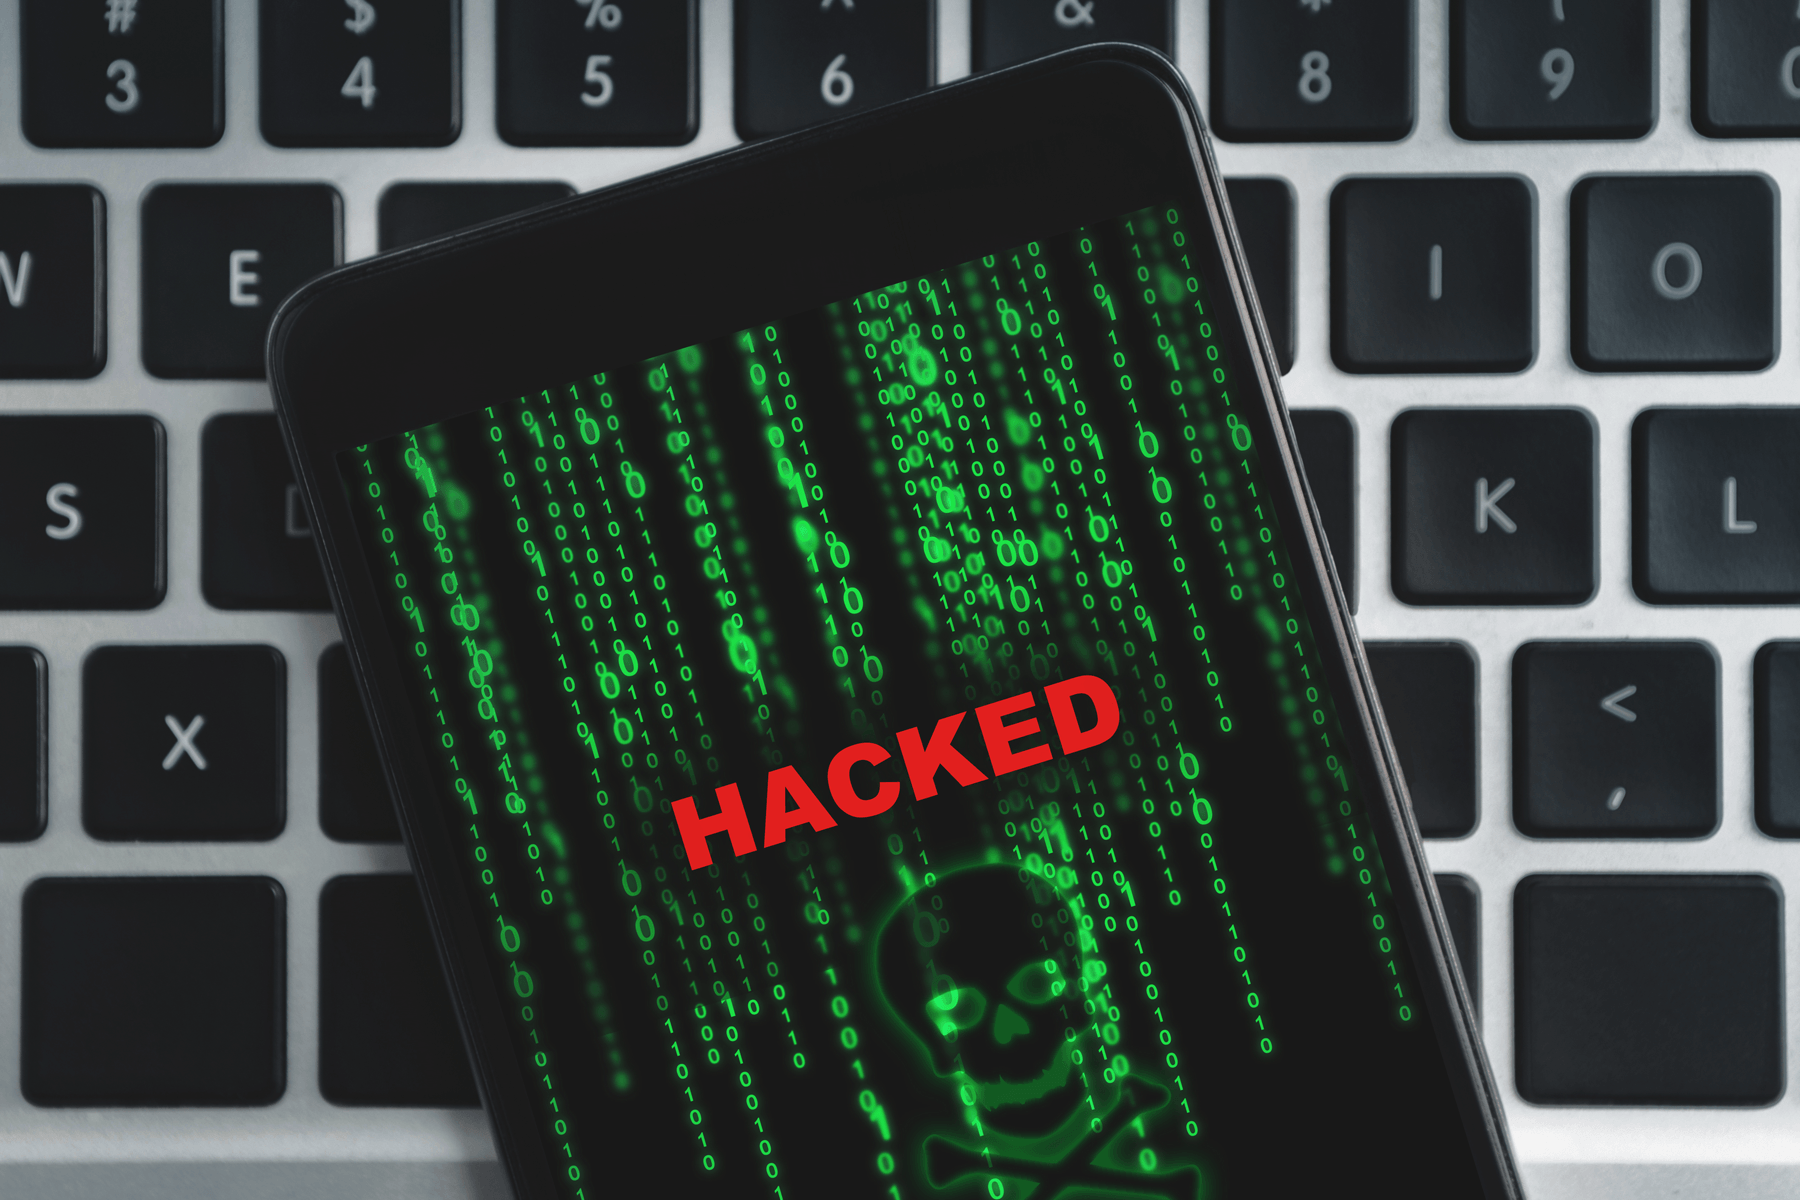 How to Keep Mobile Phone Safe from Hackers